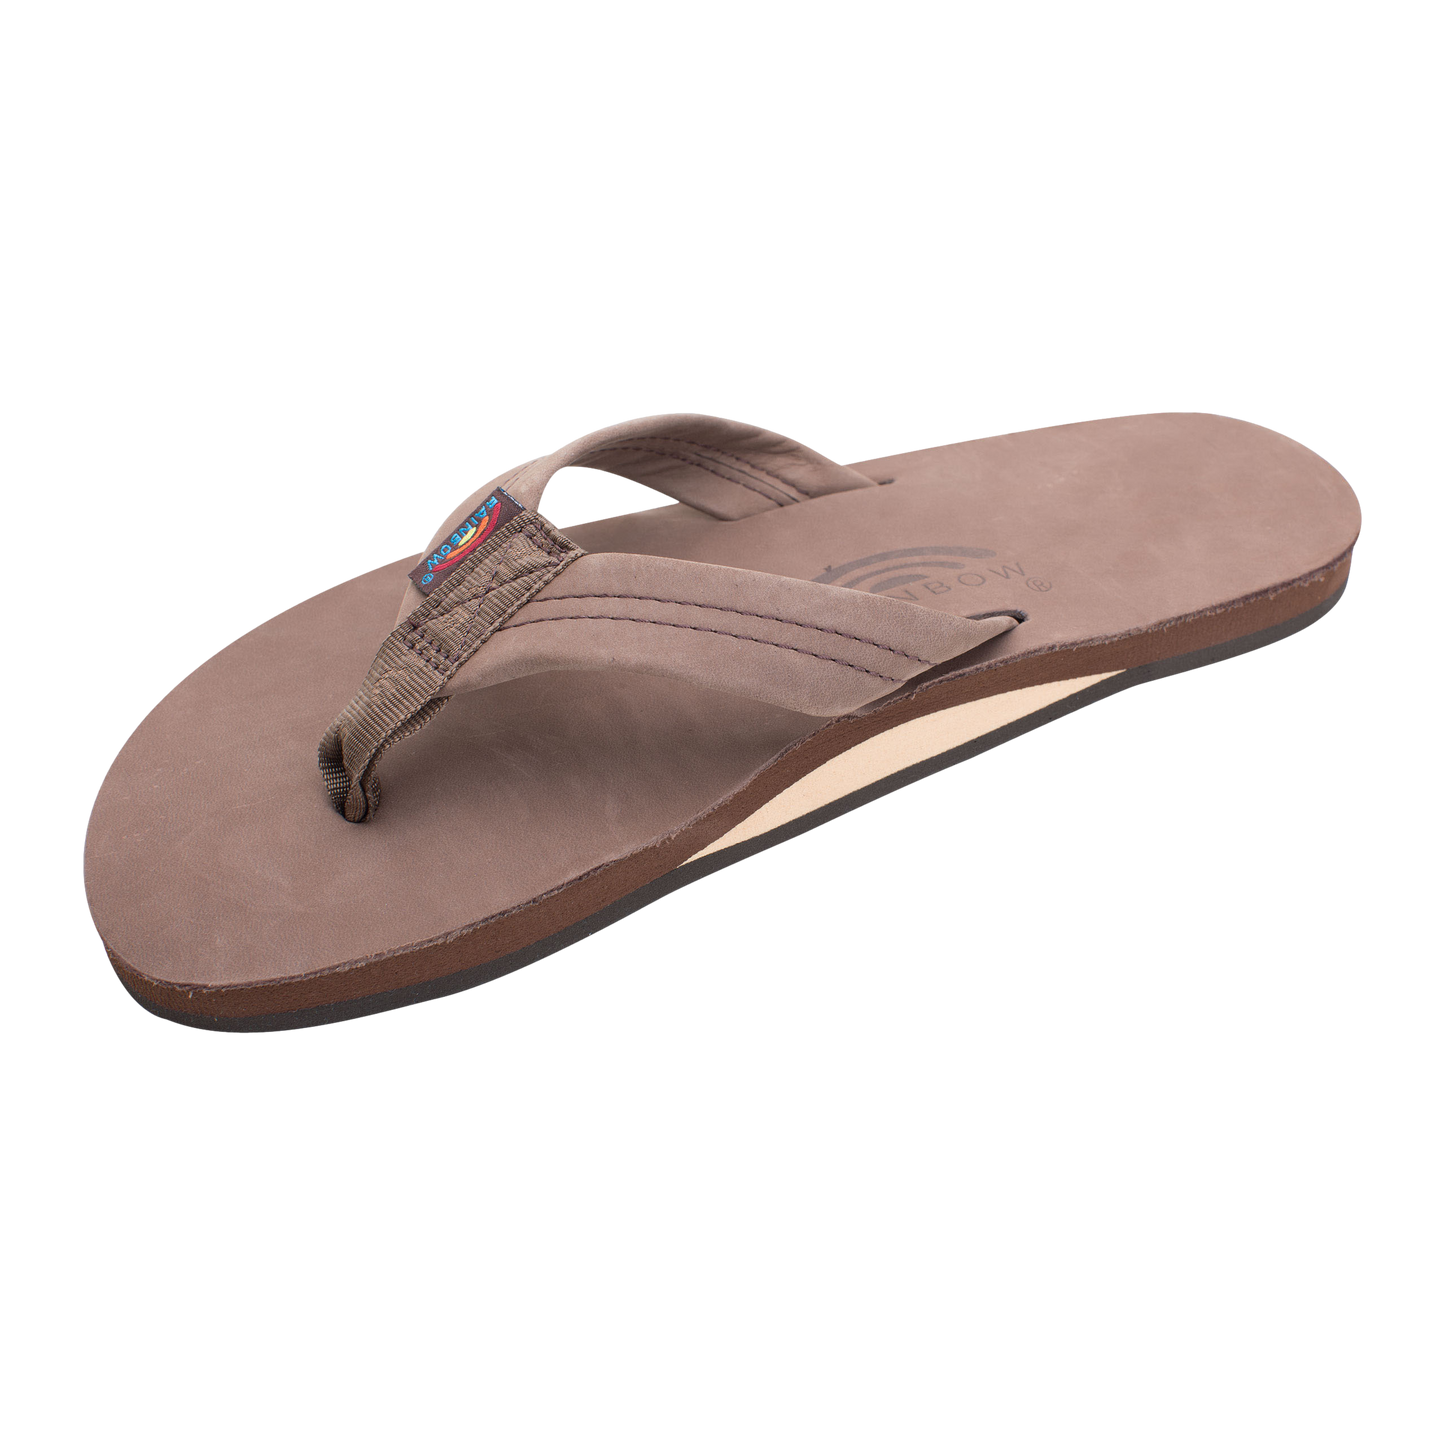 Rainbow Single Layer Premier Leather with Arch Support 1" Expresso Sandals